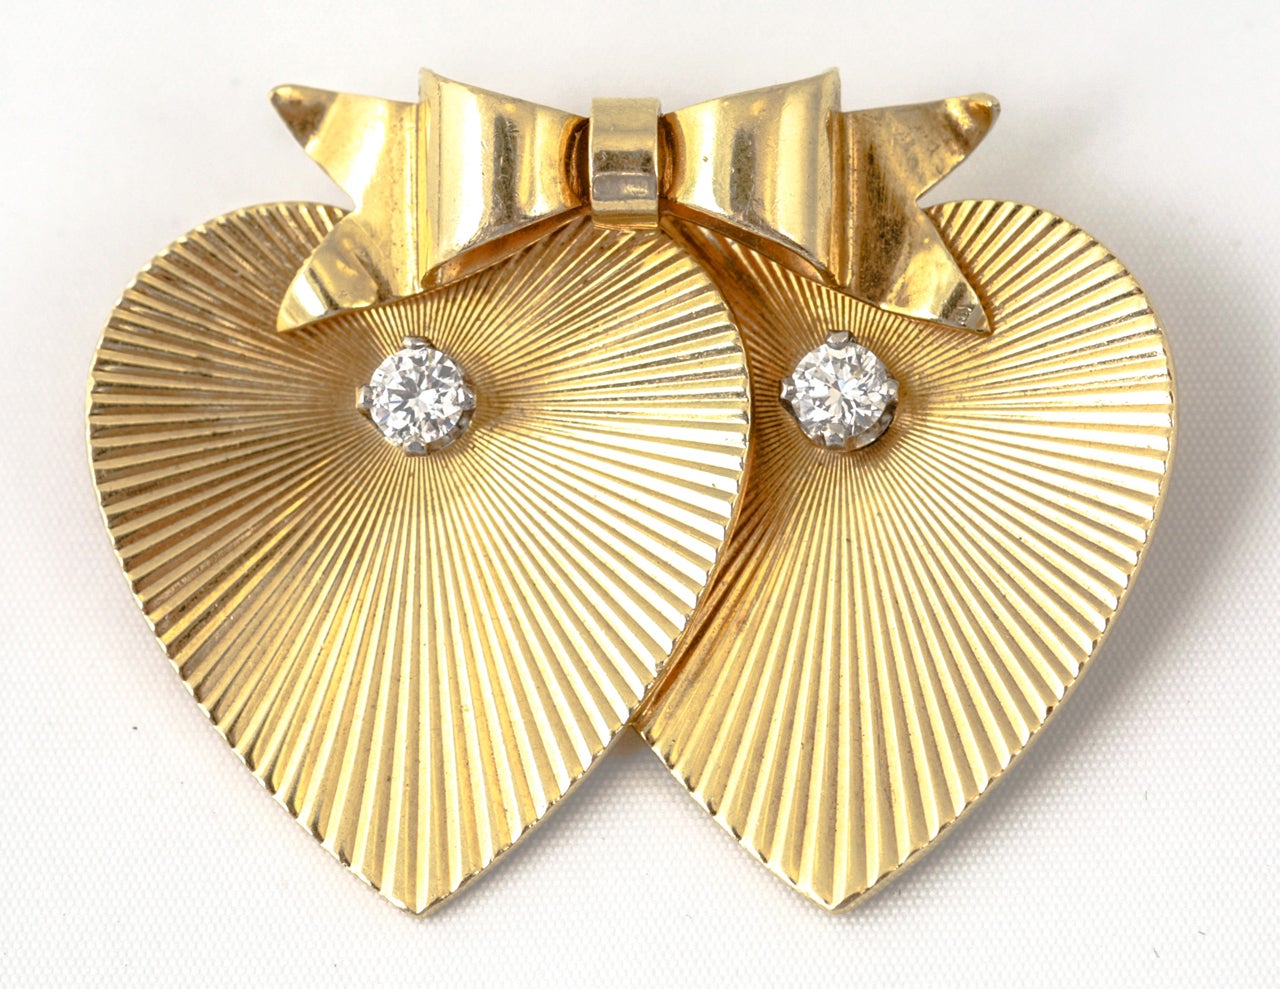 18ct gold Tiffany and Co,double heart brooch with diamonds

C. 1960